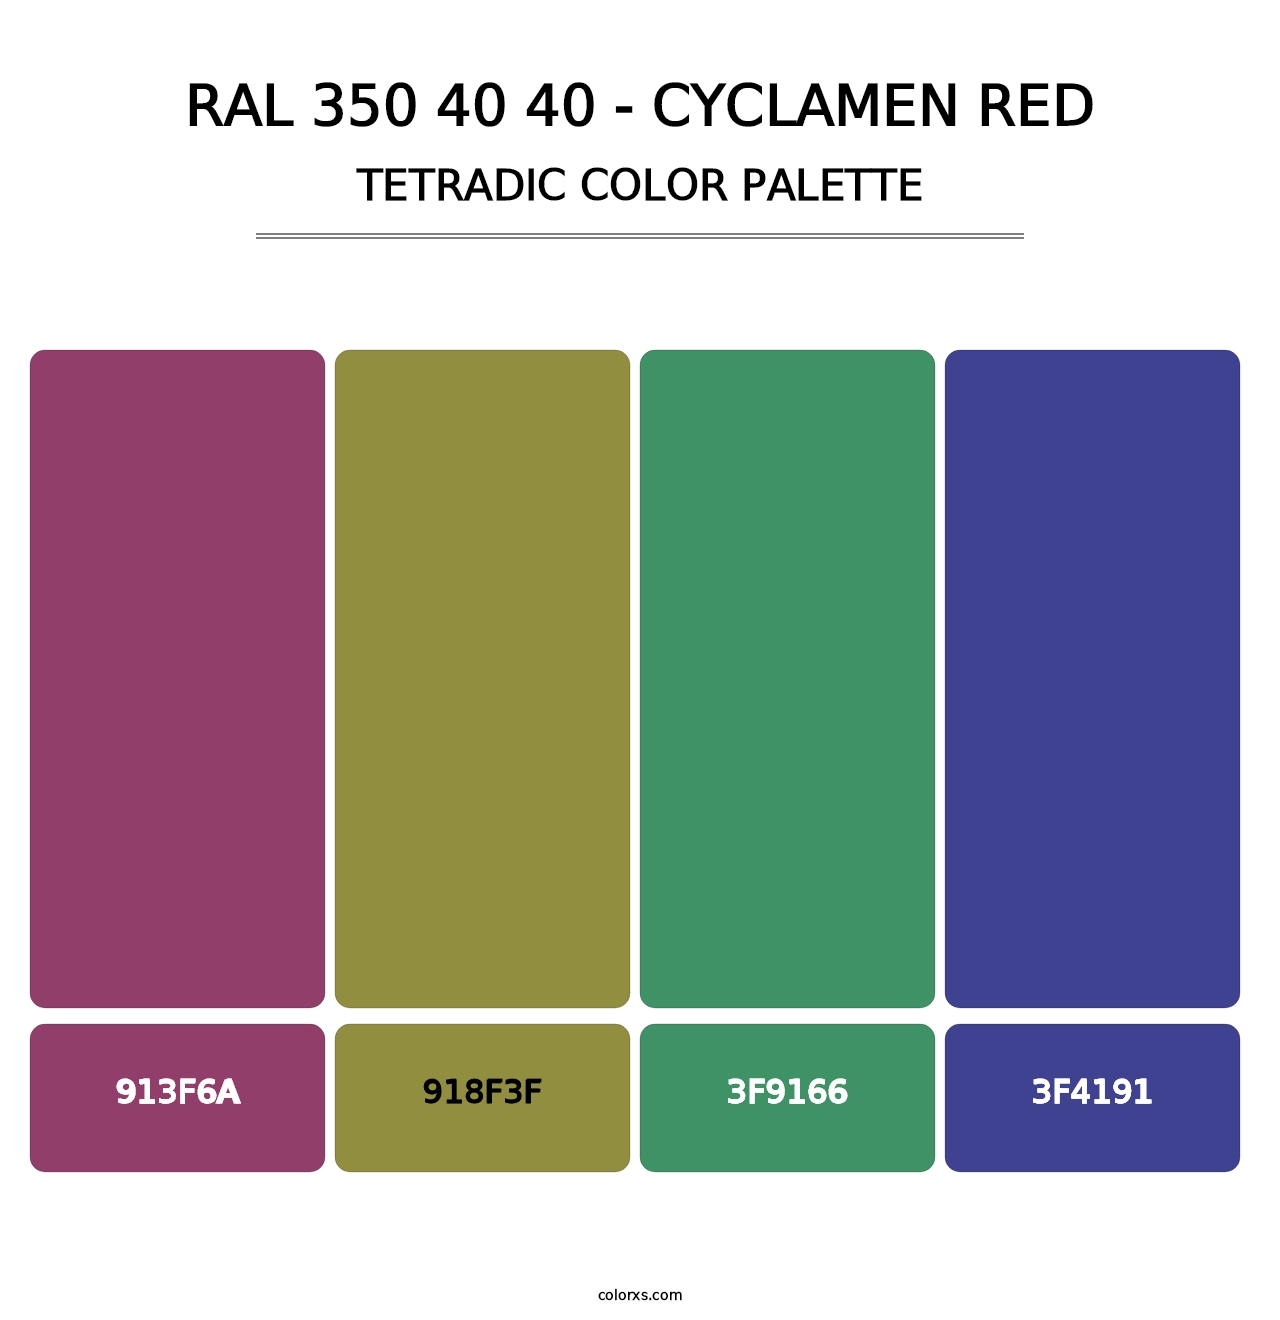 RAL 350 40 40 - Cyclamen Red - Tetradic Color Palette